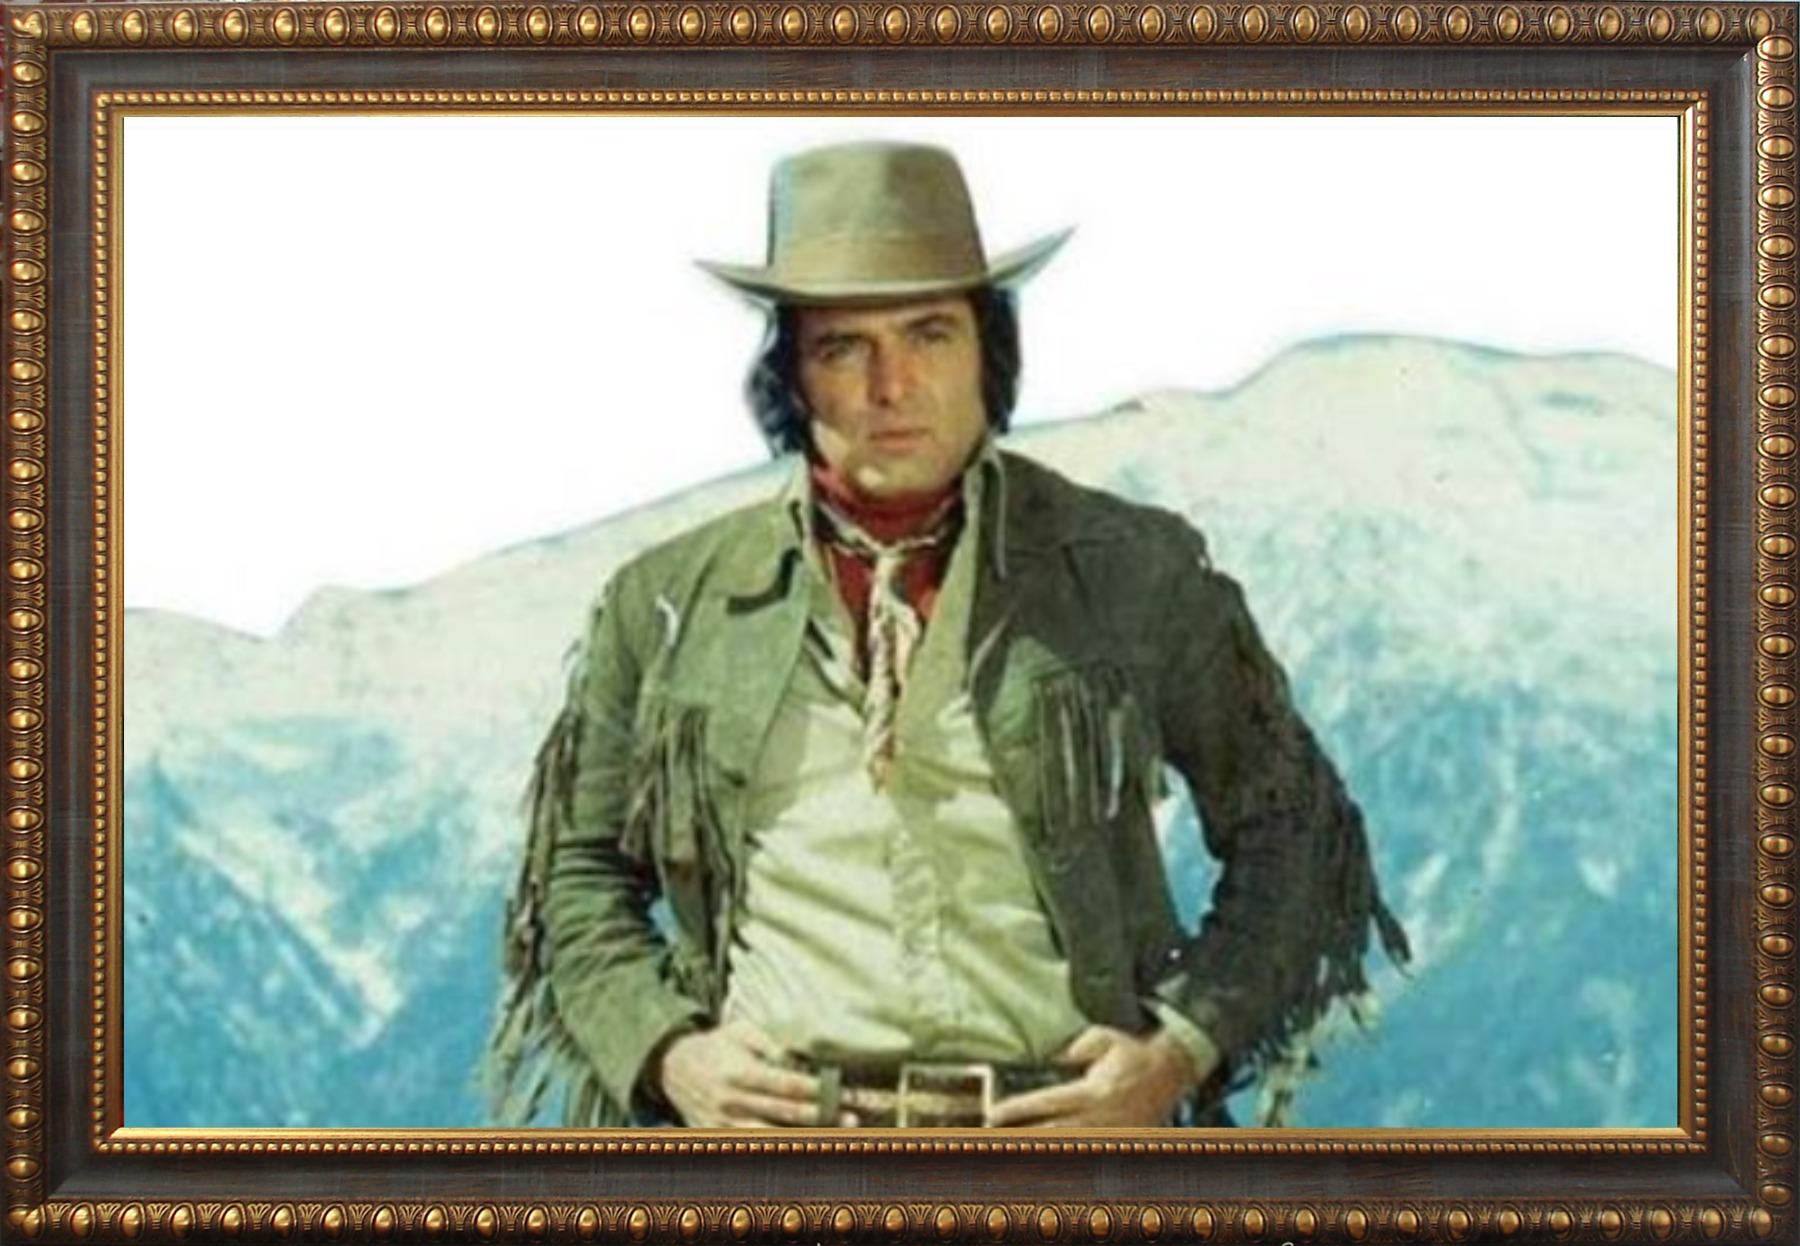 Read more about the article “Clint Eastwood of India -Dashing Feroz Khan”.